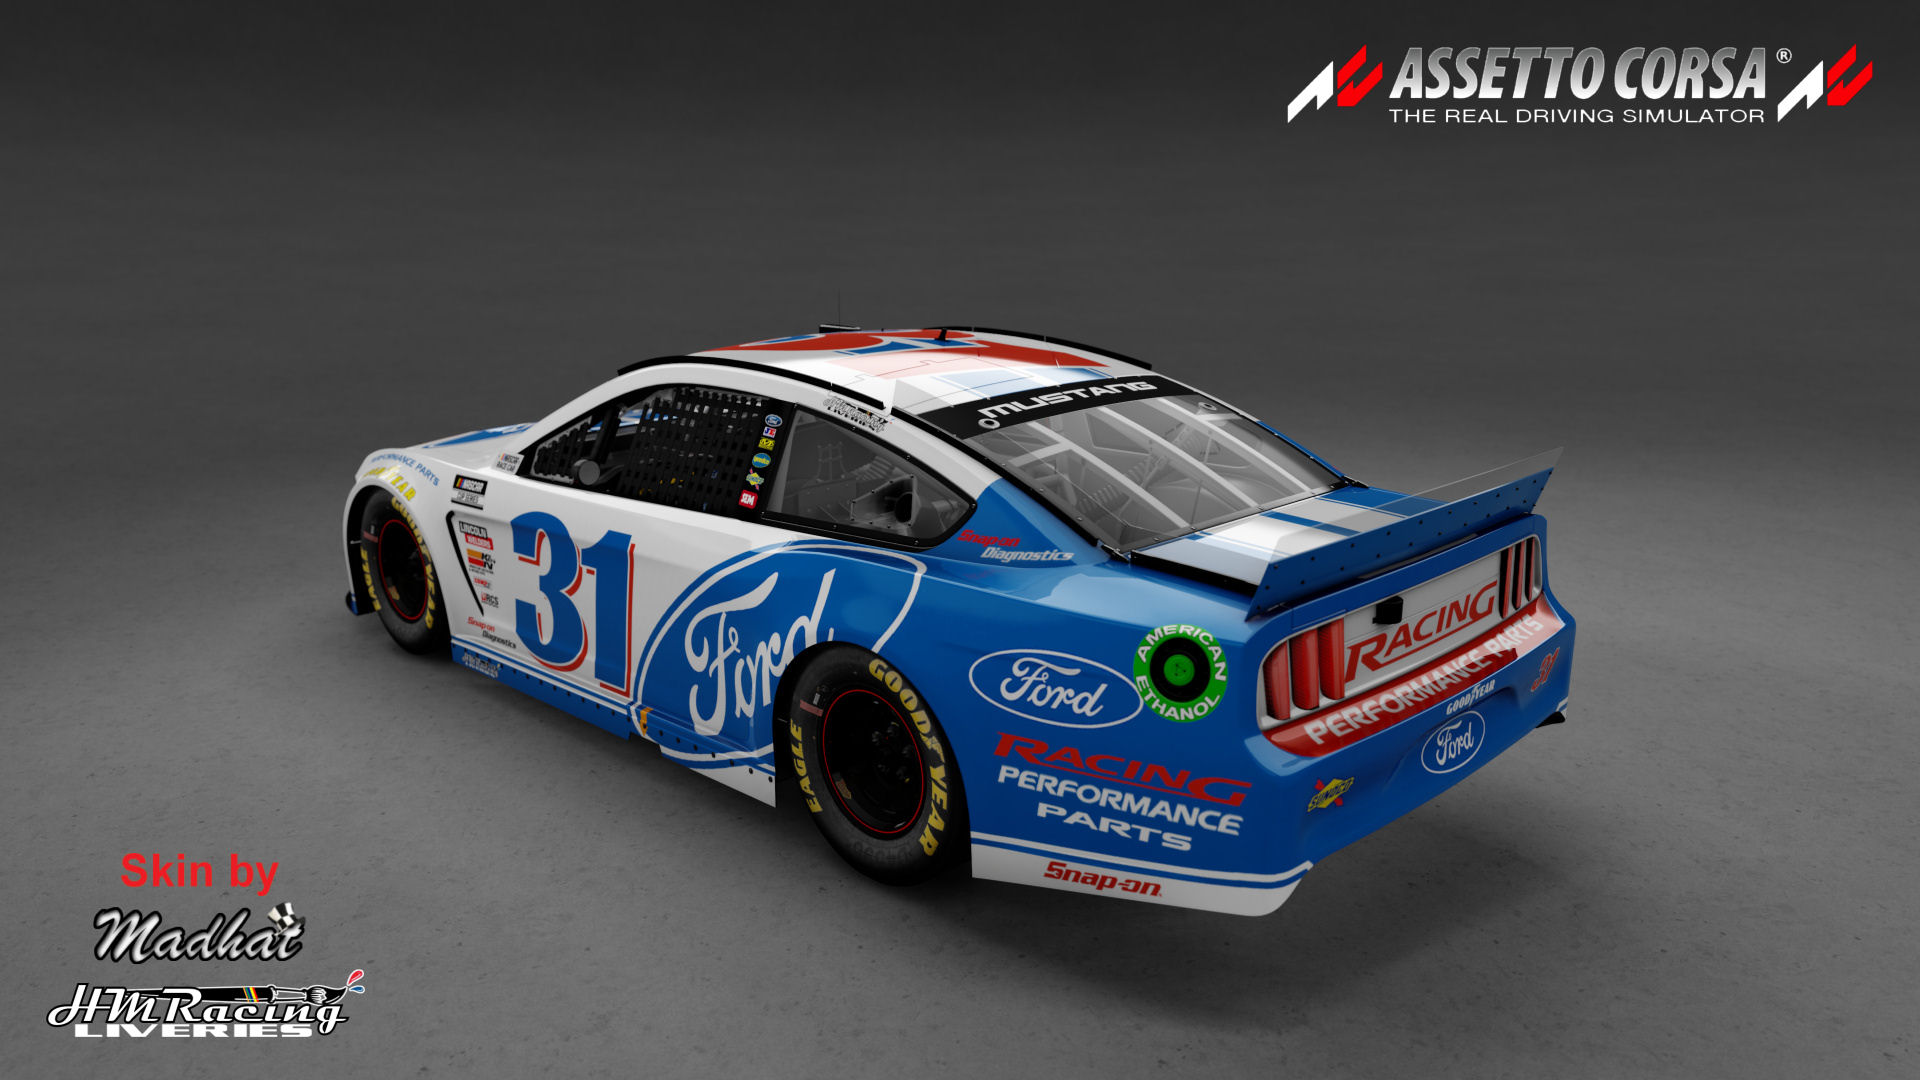 Ford Performance Parts Mustang Nascar Madhat HMRacing Liveries 05.jpg